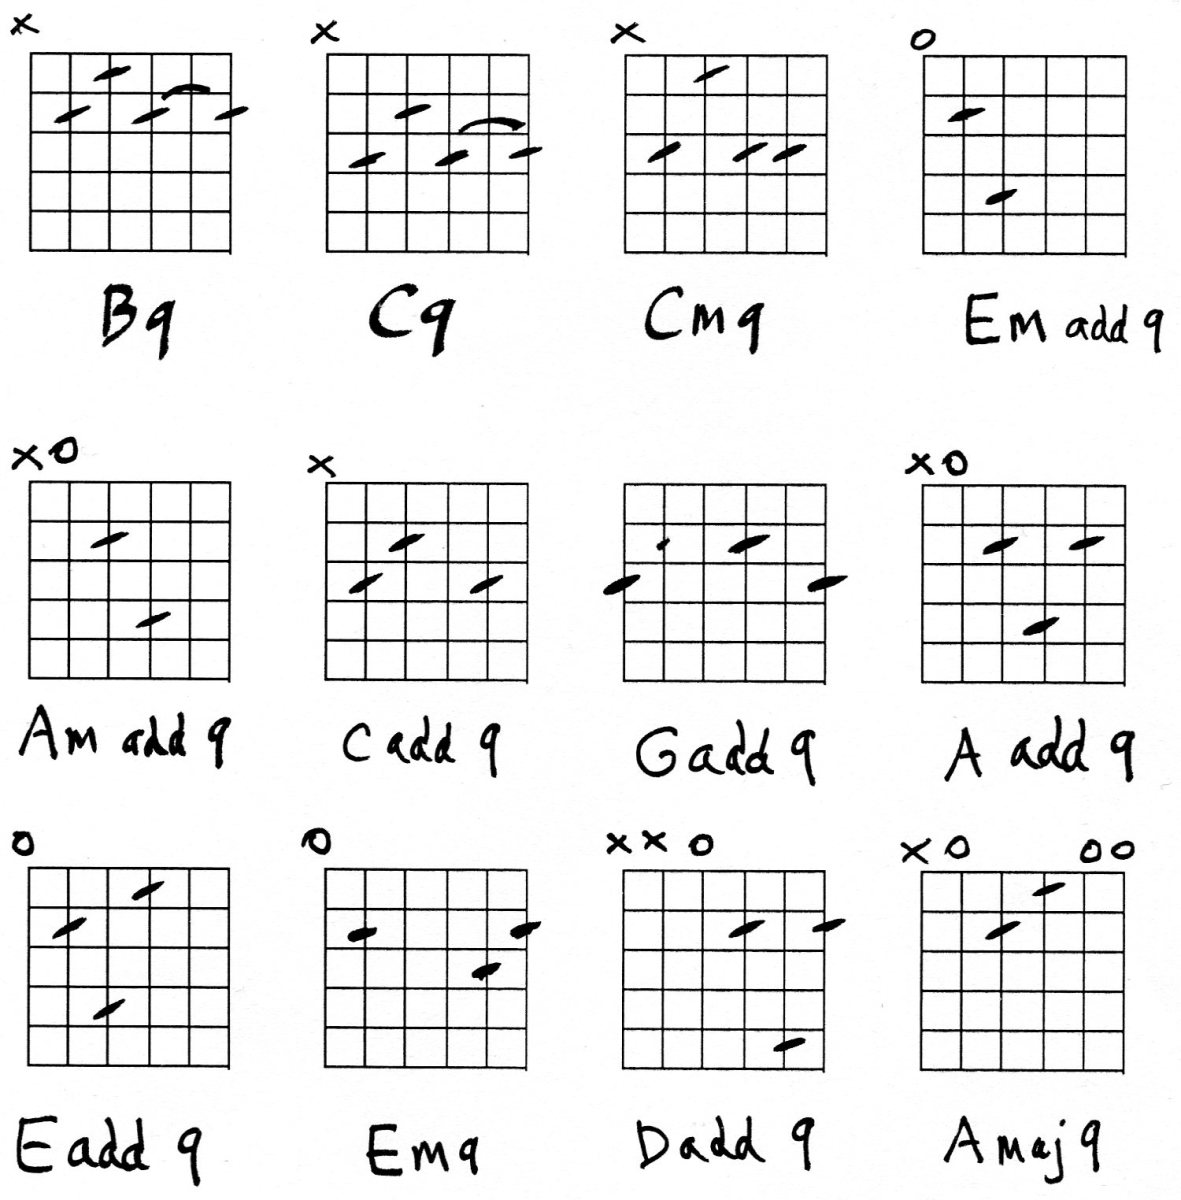 Guitar - 9th chords chart | HubPages